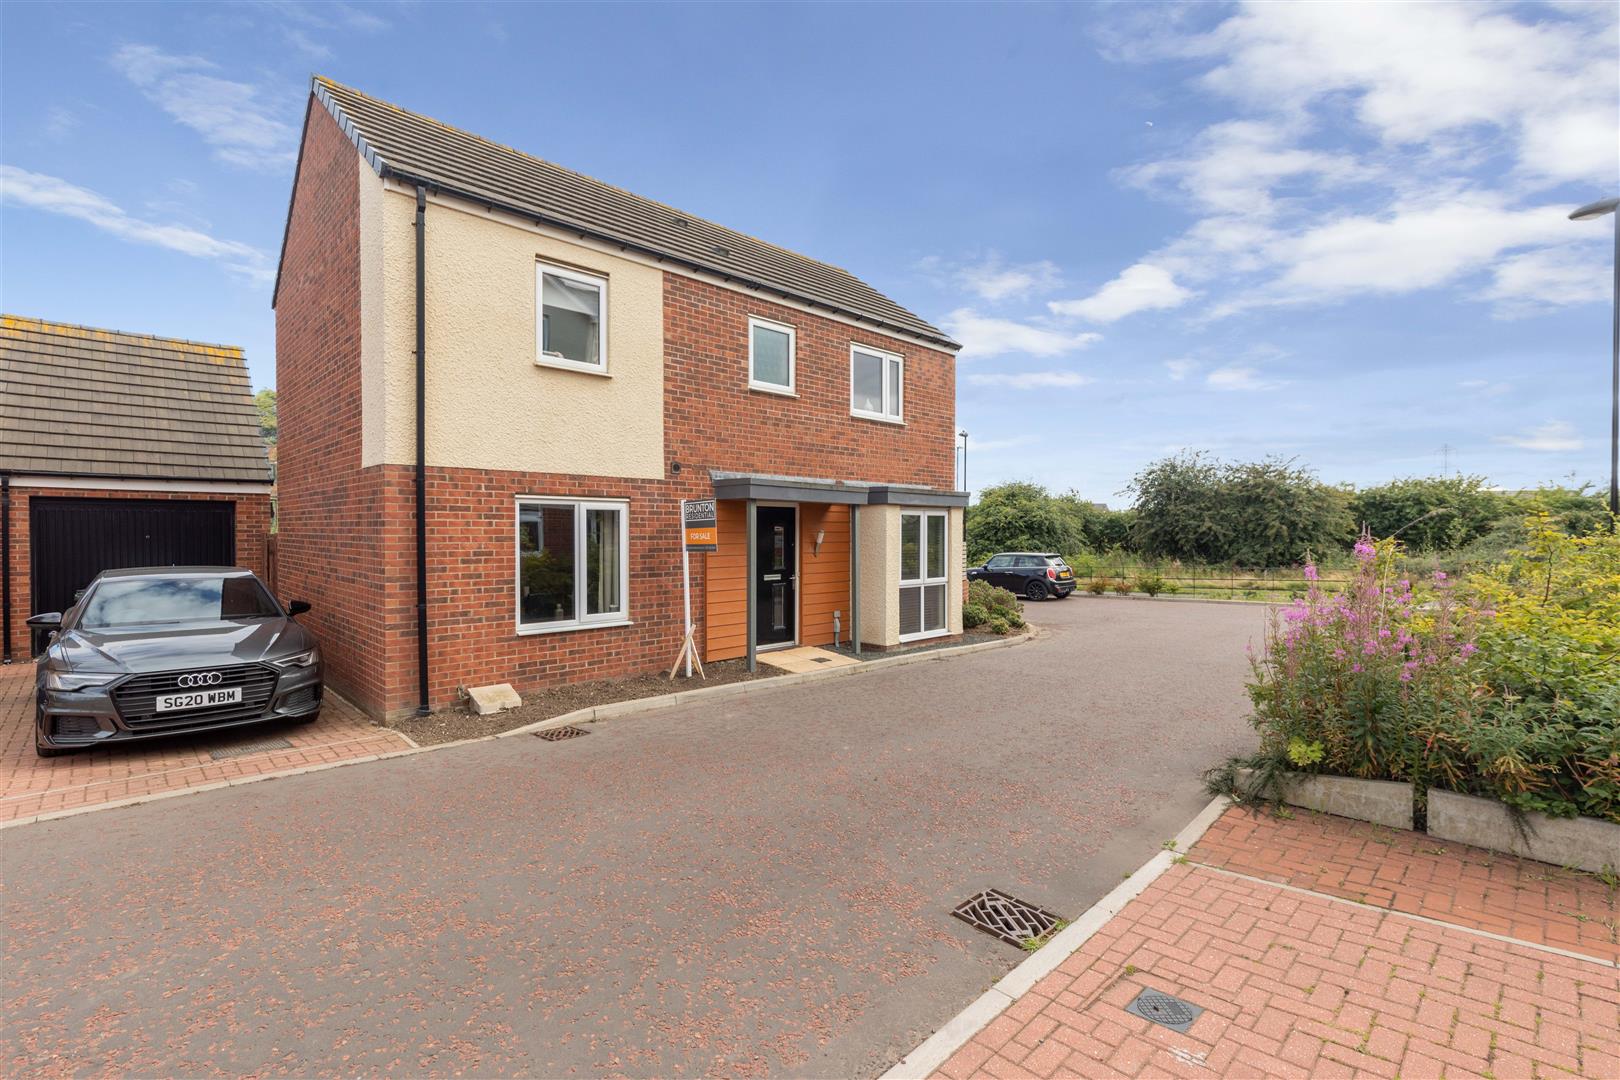 3 bed detached house for sale in Elemore Close, Great Park  - Property Image 1